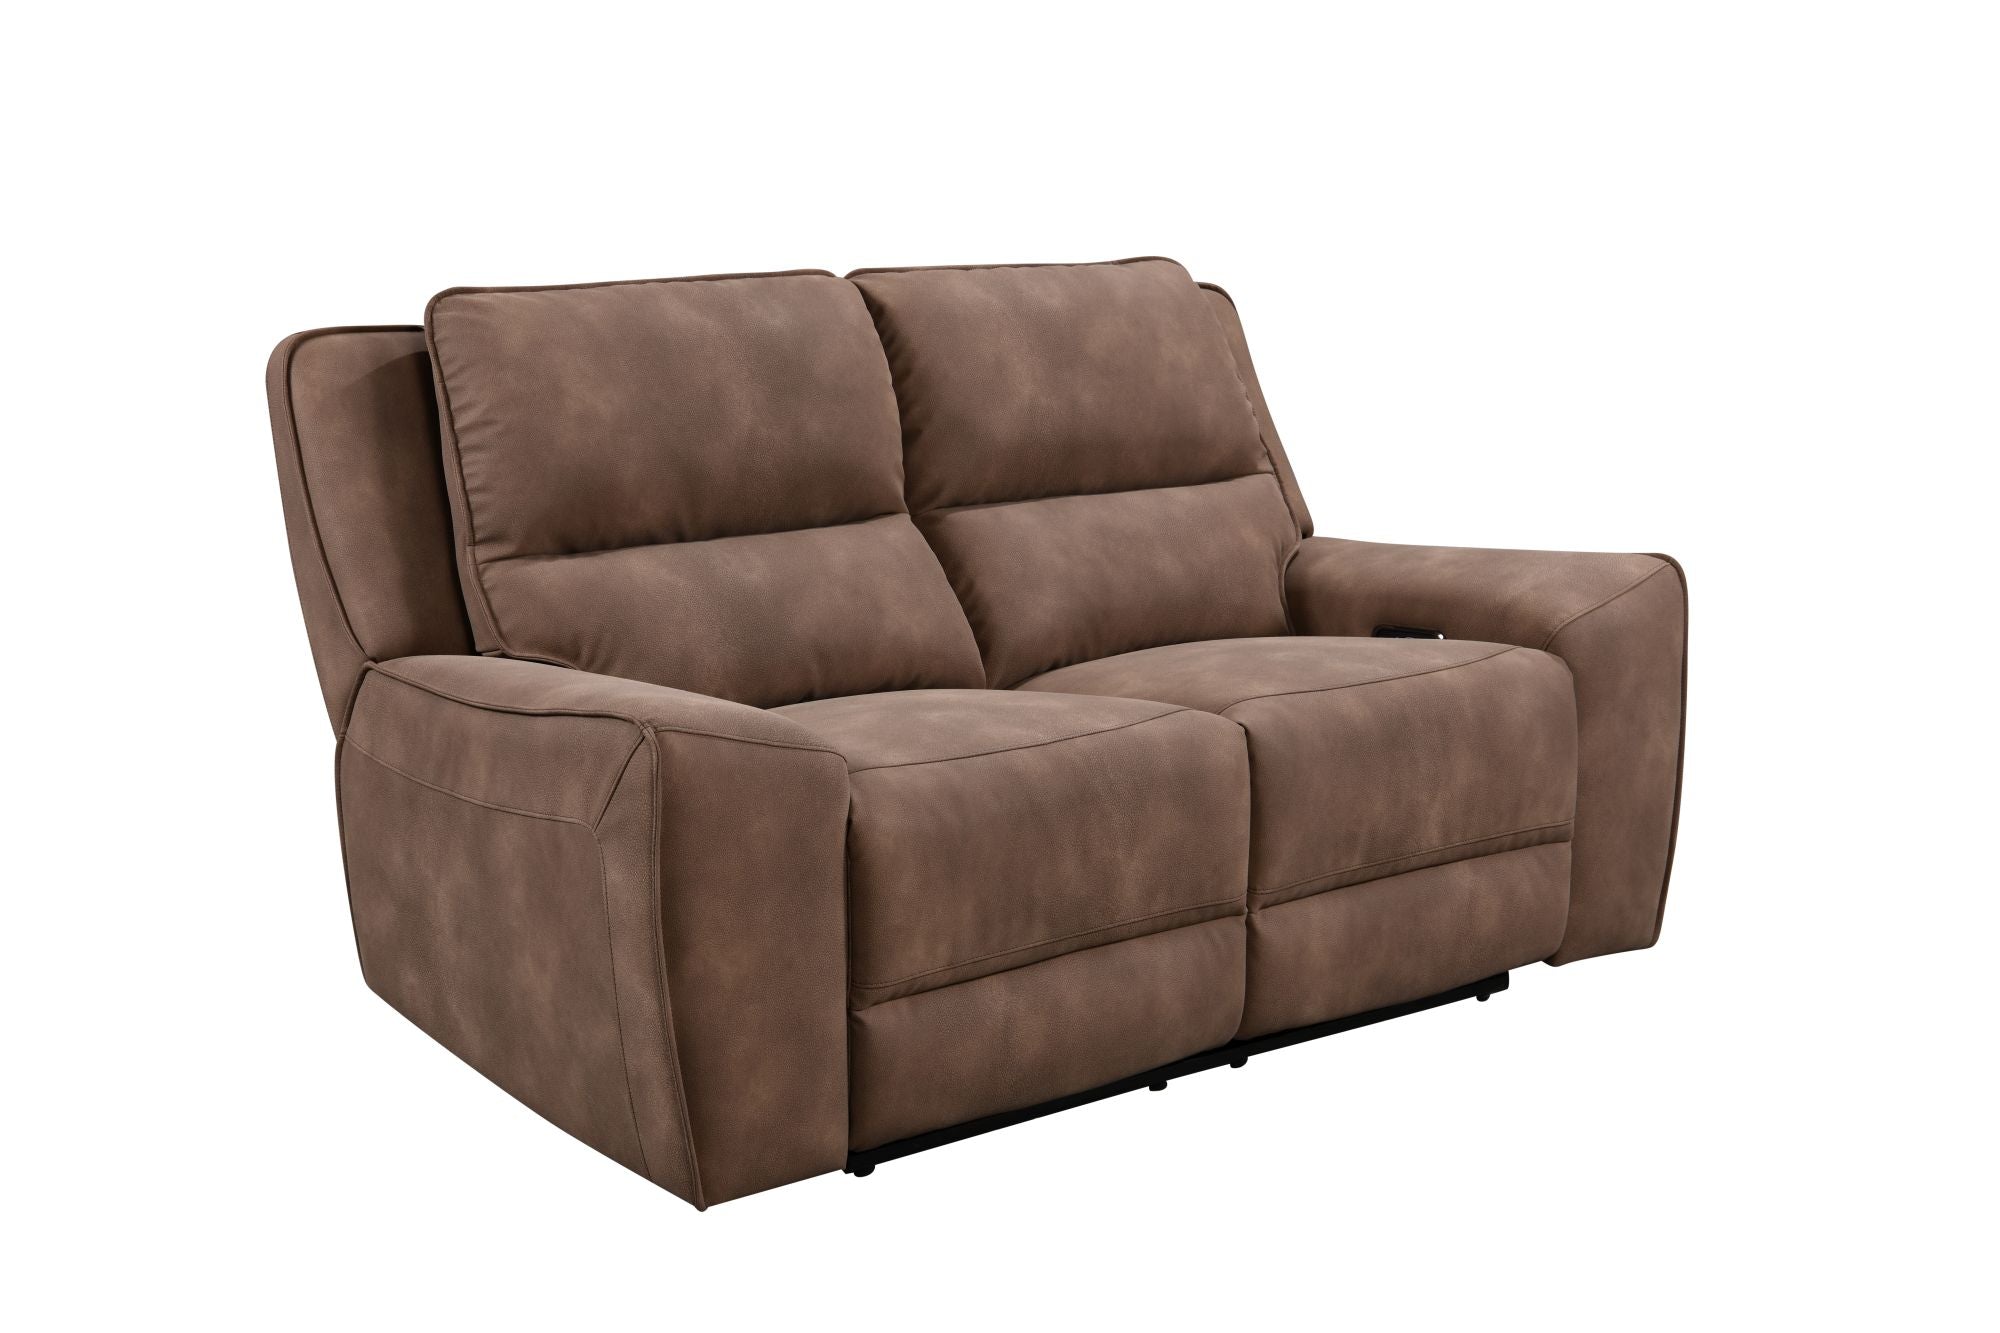 Grande 2 Seater Sofa Power Recliner with Power Headrest